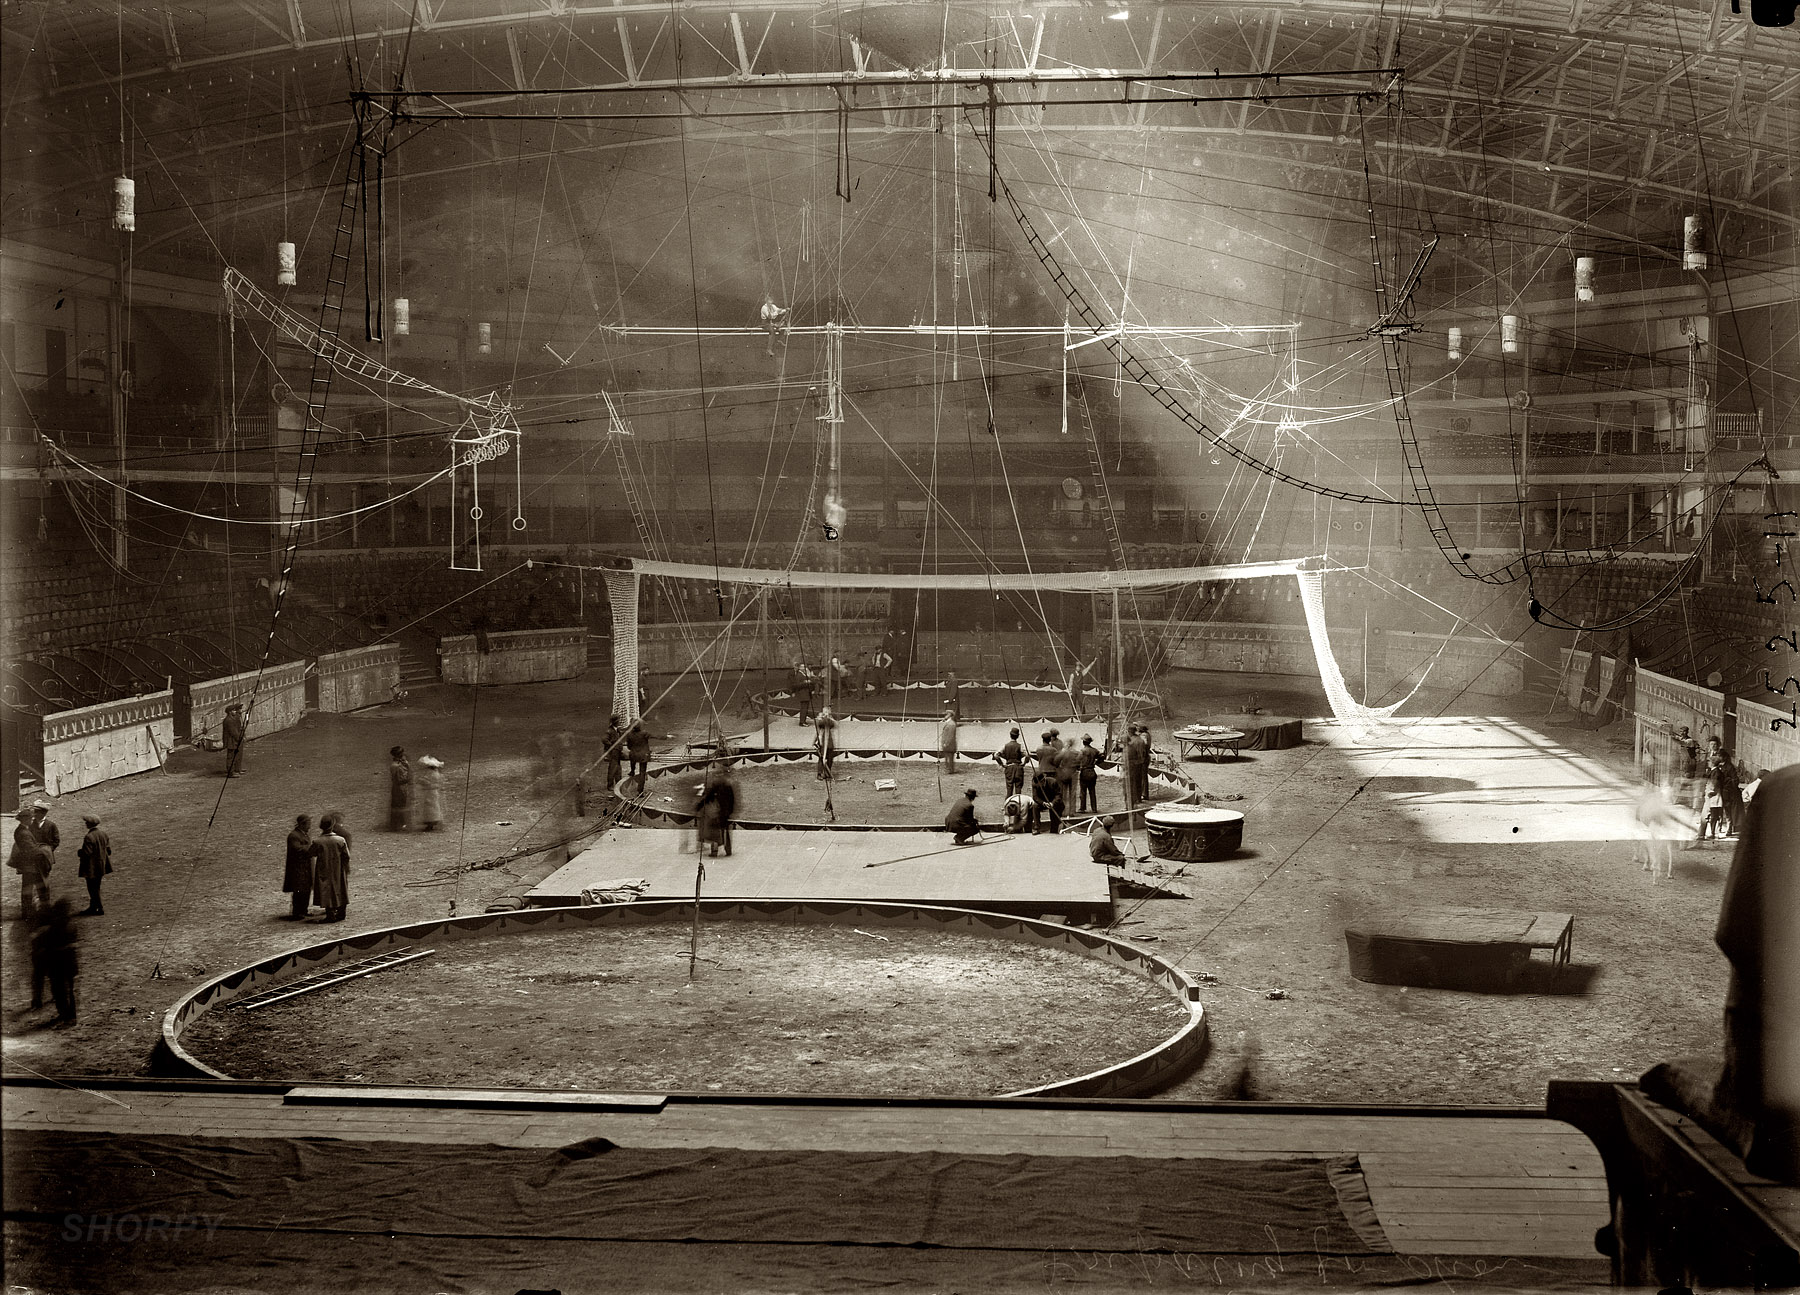 New York. March 21, 1913. Preparing for Circus Week at Madison Square Garden. 5x7 glass negative, George Grantham Bain Collection. View full size.